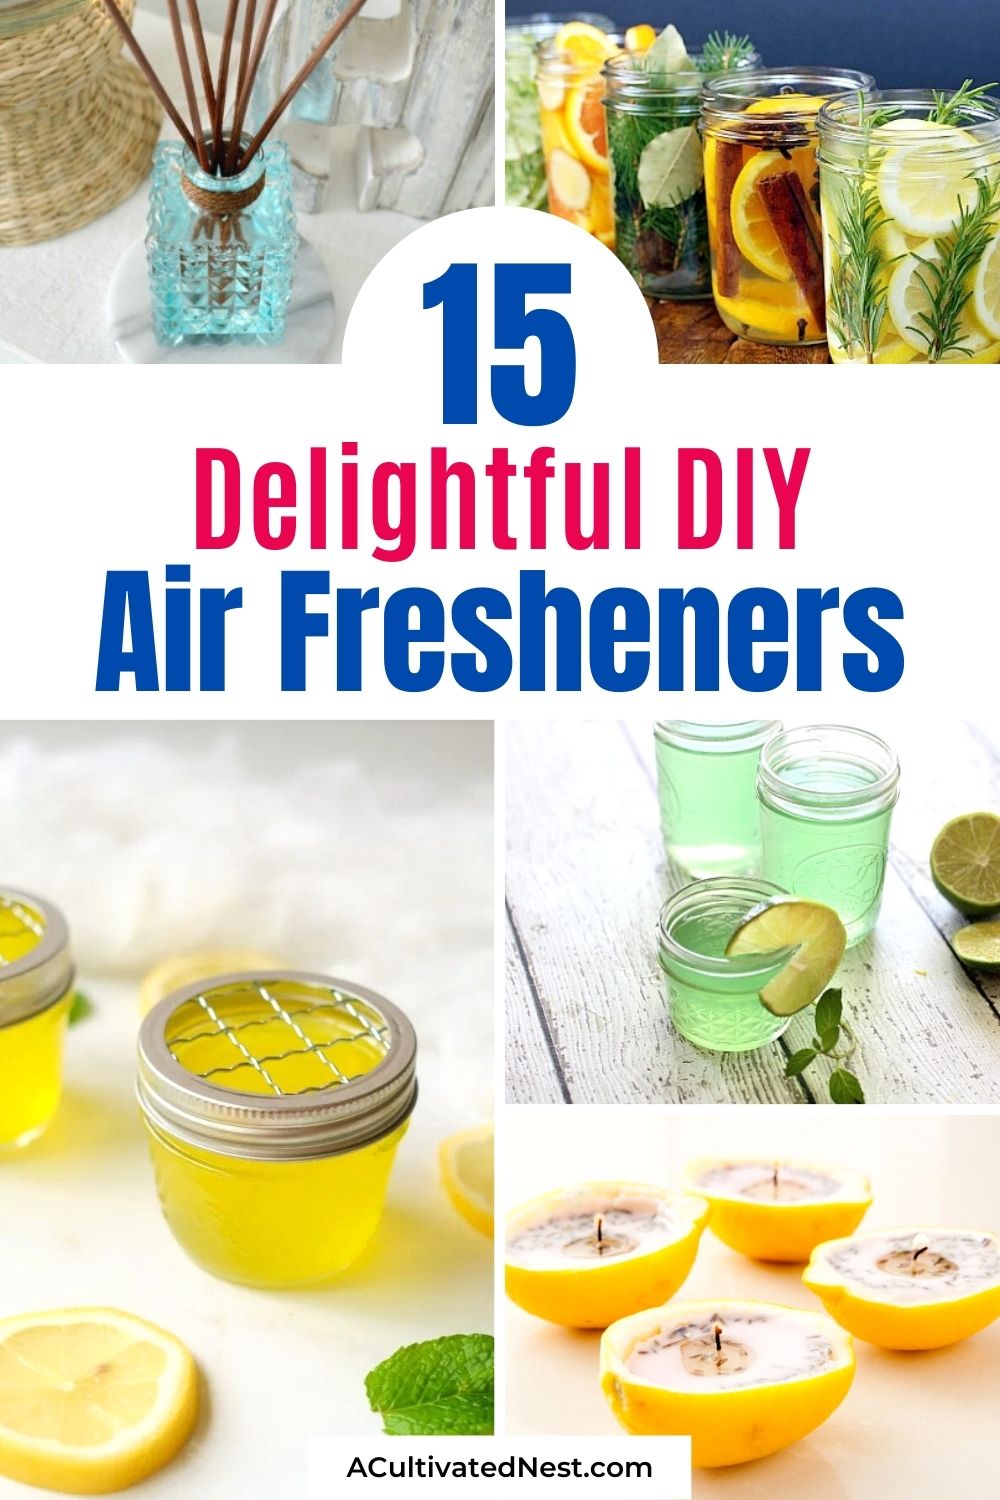 15 DIY Air Fresheners to Make Your Home Smell Good- If you want to have a lovely smelling home naturally and on a budget, then try these DIY air fresheners! They're easy to make, and smell delightful! | homemade air freshener, #diyAirFreshener #diy #airFreshener #homemadeAirFreshener #ACultivatedNest